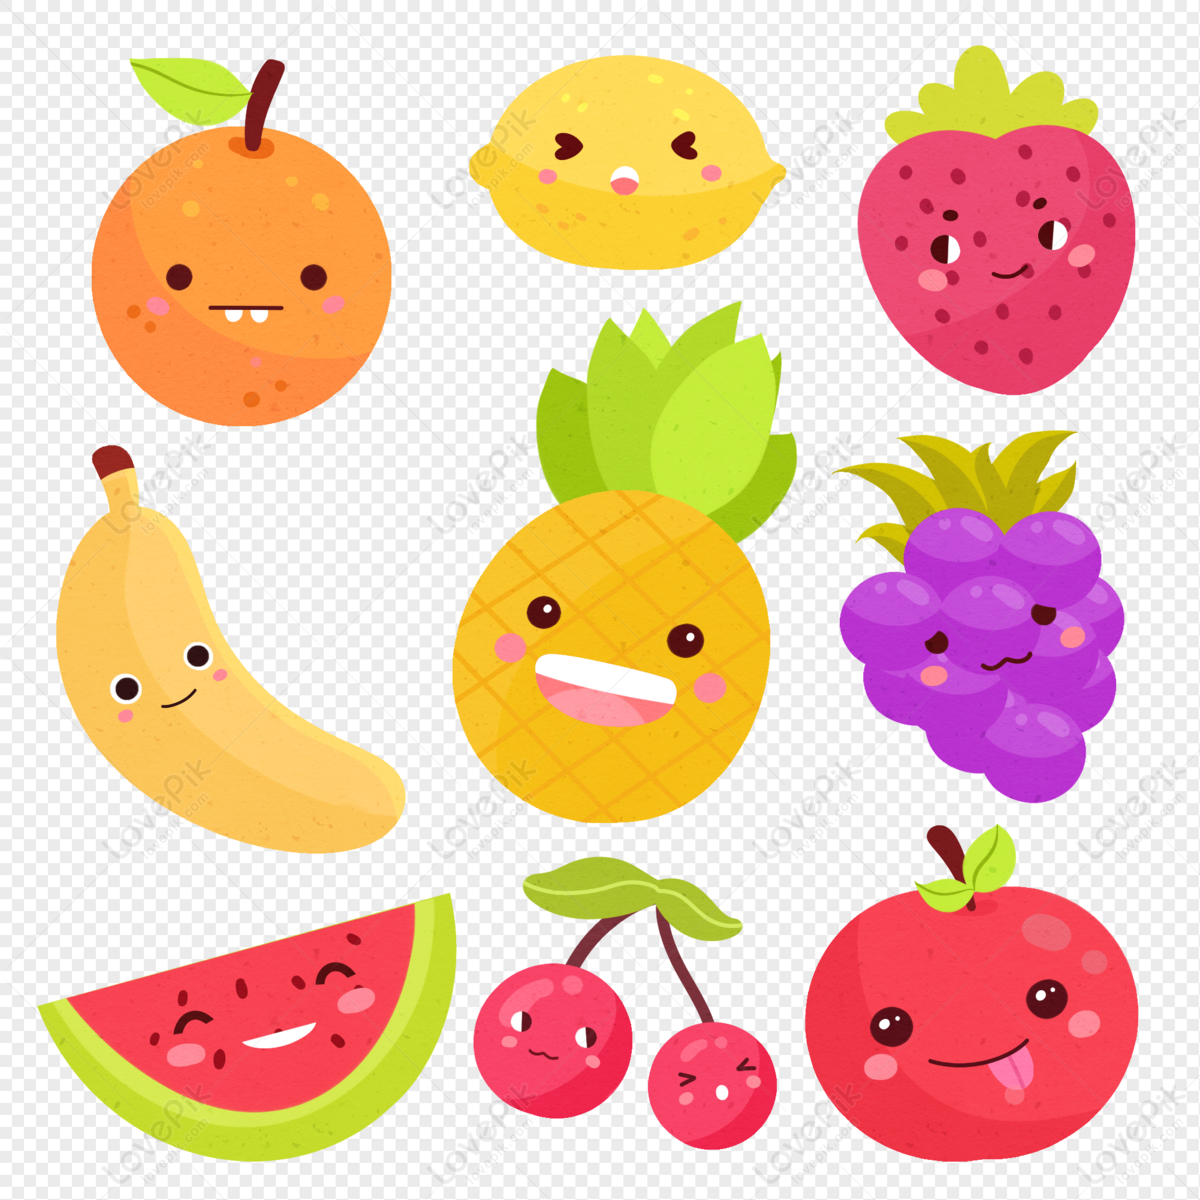 Cartoon Cute Fruit PNG Image Free Download And Clipart Image For Free  Download - Lovepik | 401595051